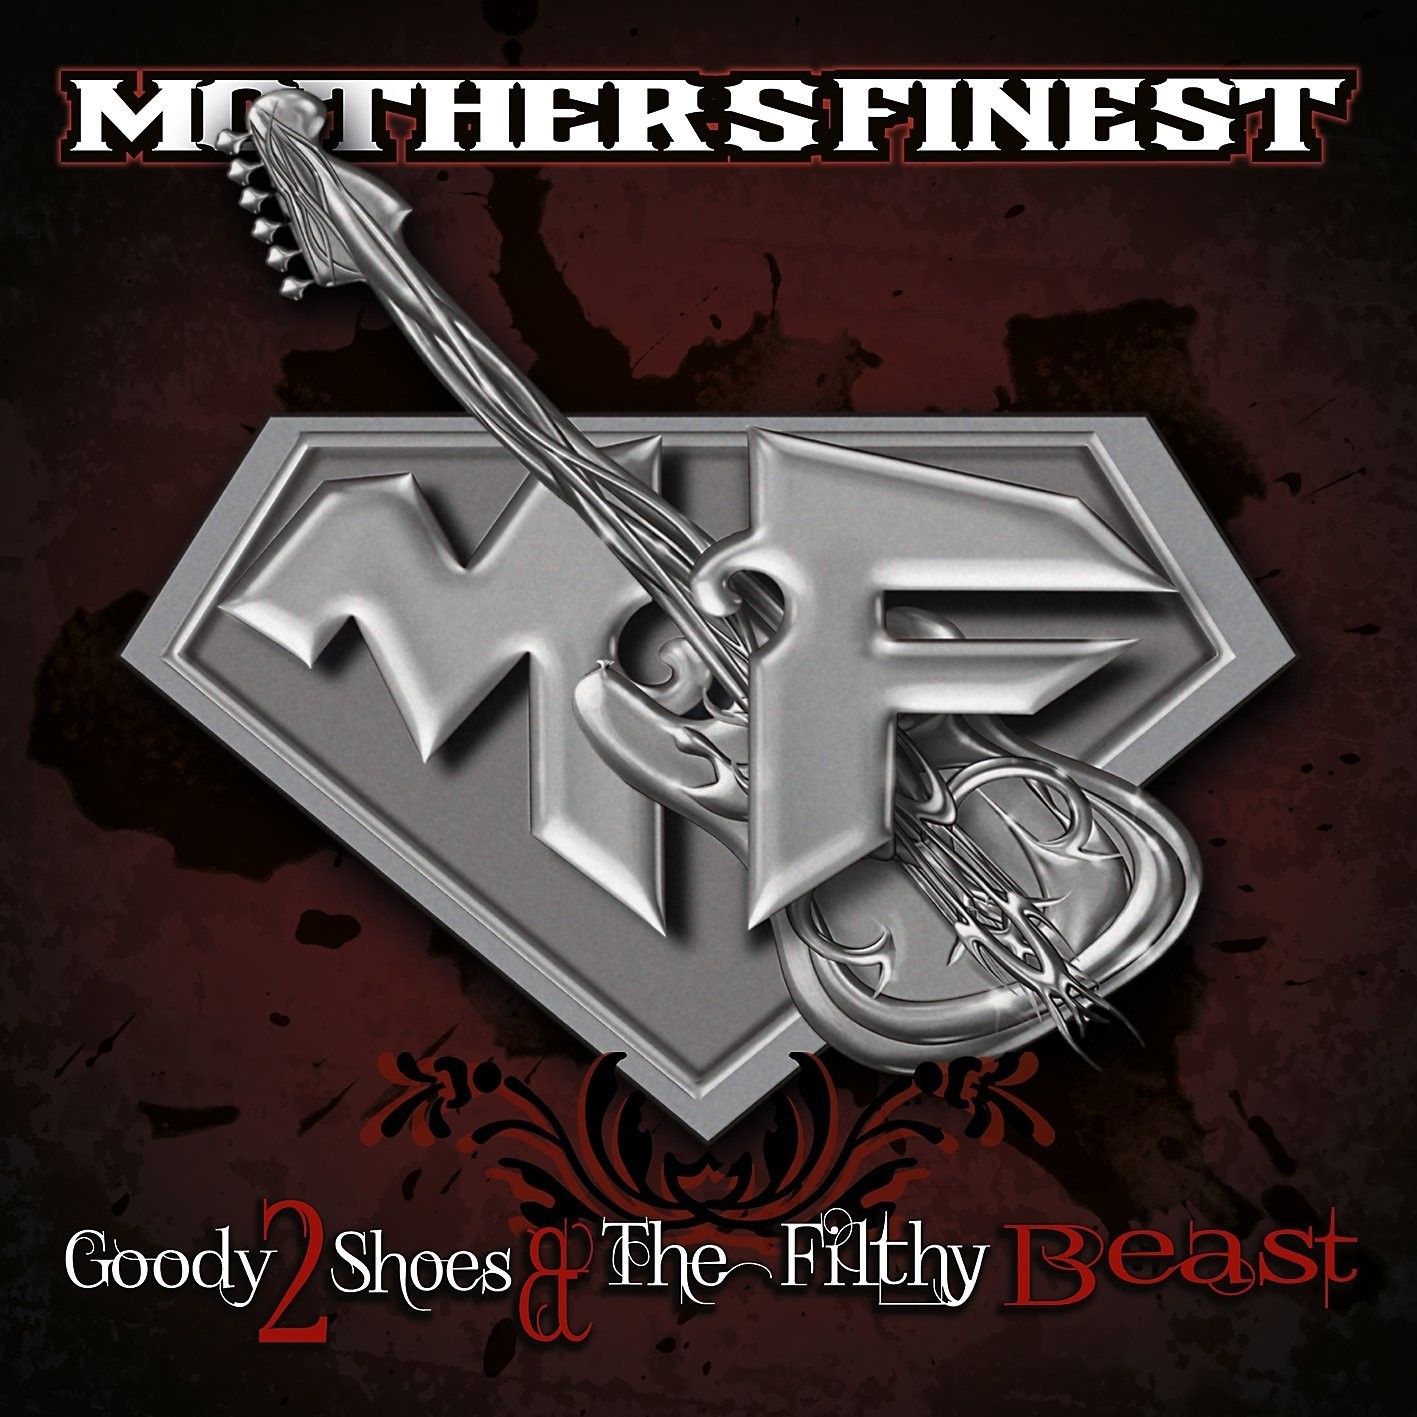 Mothers Finest - Goody 2 Shoes & The
Filthy Beasts